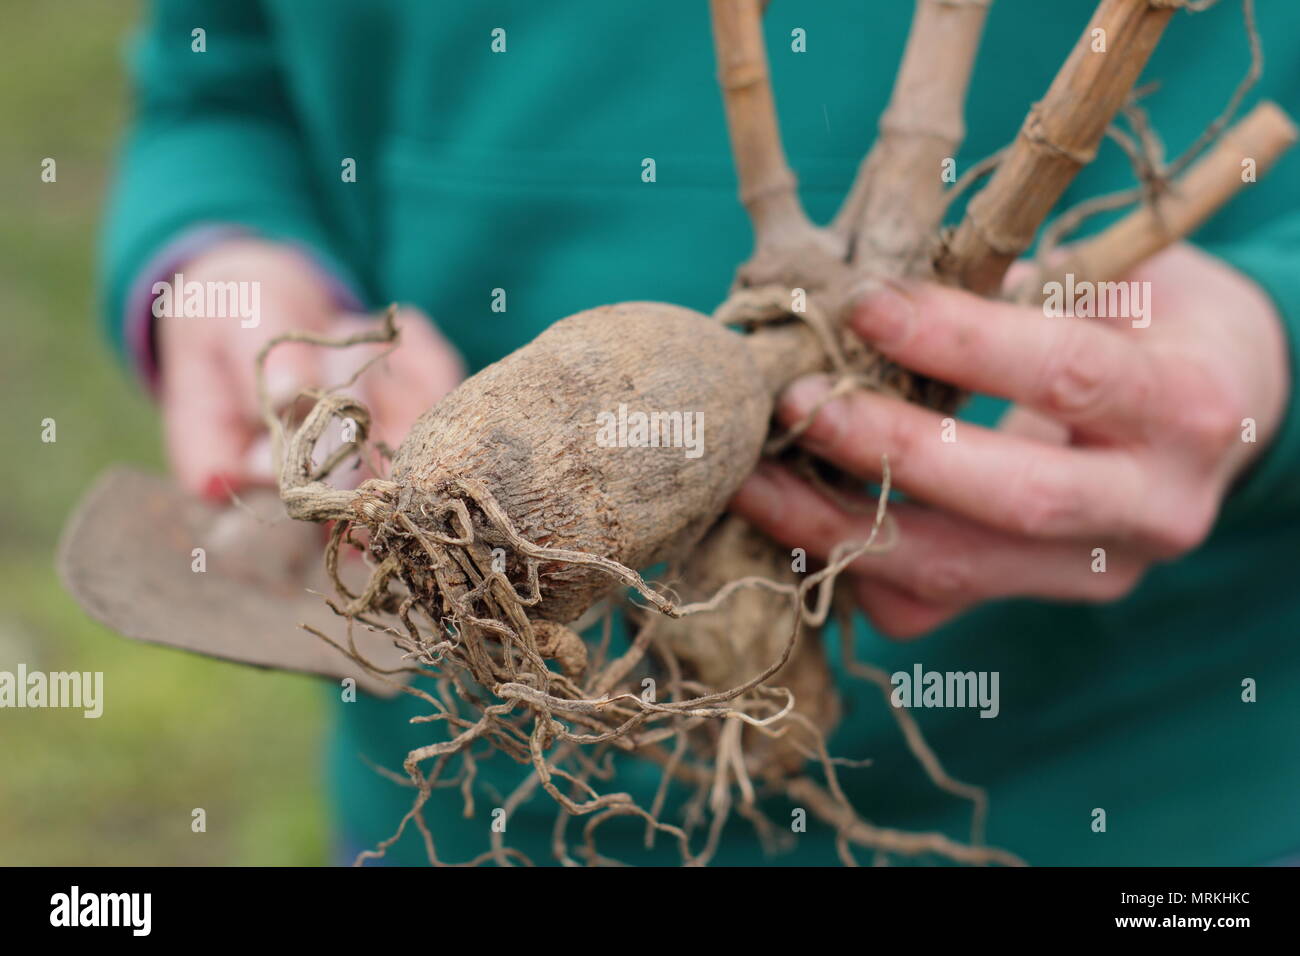 Over wintered dahlia tubers inspected for rot prior to potting up to kick start growth in spring, UK Stock Photo